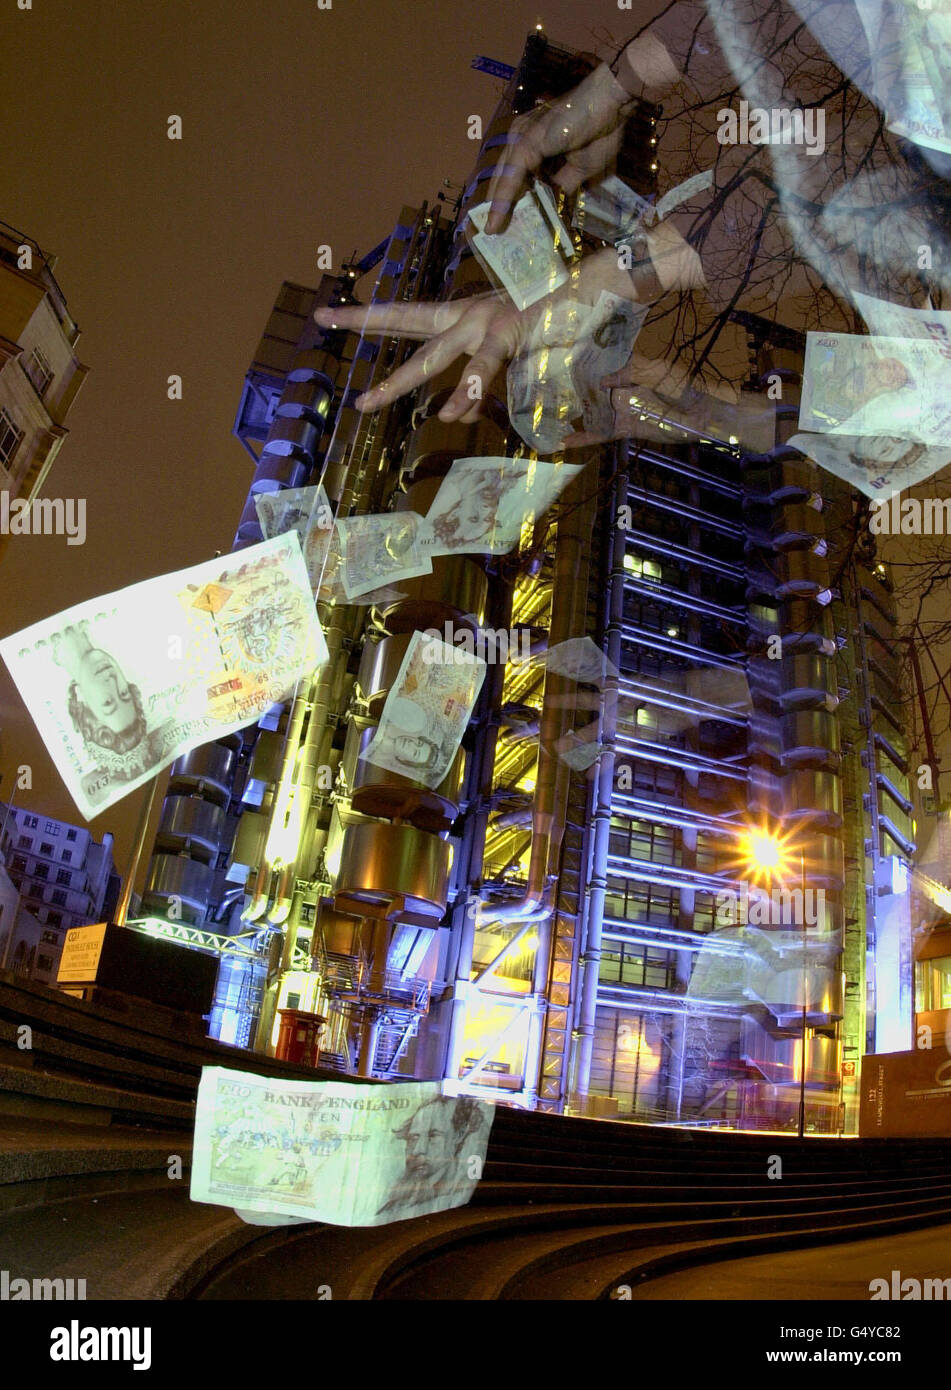 Bank notes fluttering in front of the Lloyds insurance market building in the City of London, taken 27/02/2000 evening, as Lloyds Names prepare to go to the High Court, London, claiming they were victims of a massive fraud in the 1980's. * The photographic effect is achieved by shooting the bank notes with multiple flash. Stock Photo